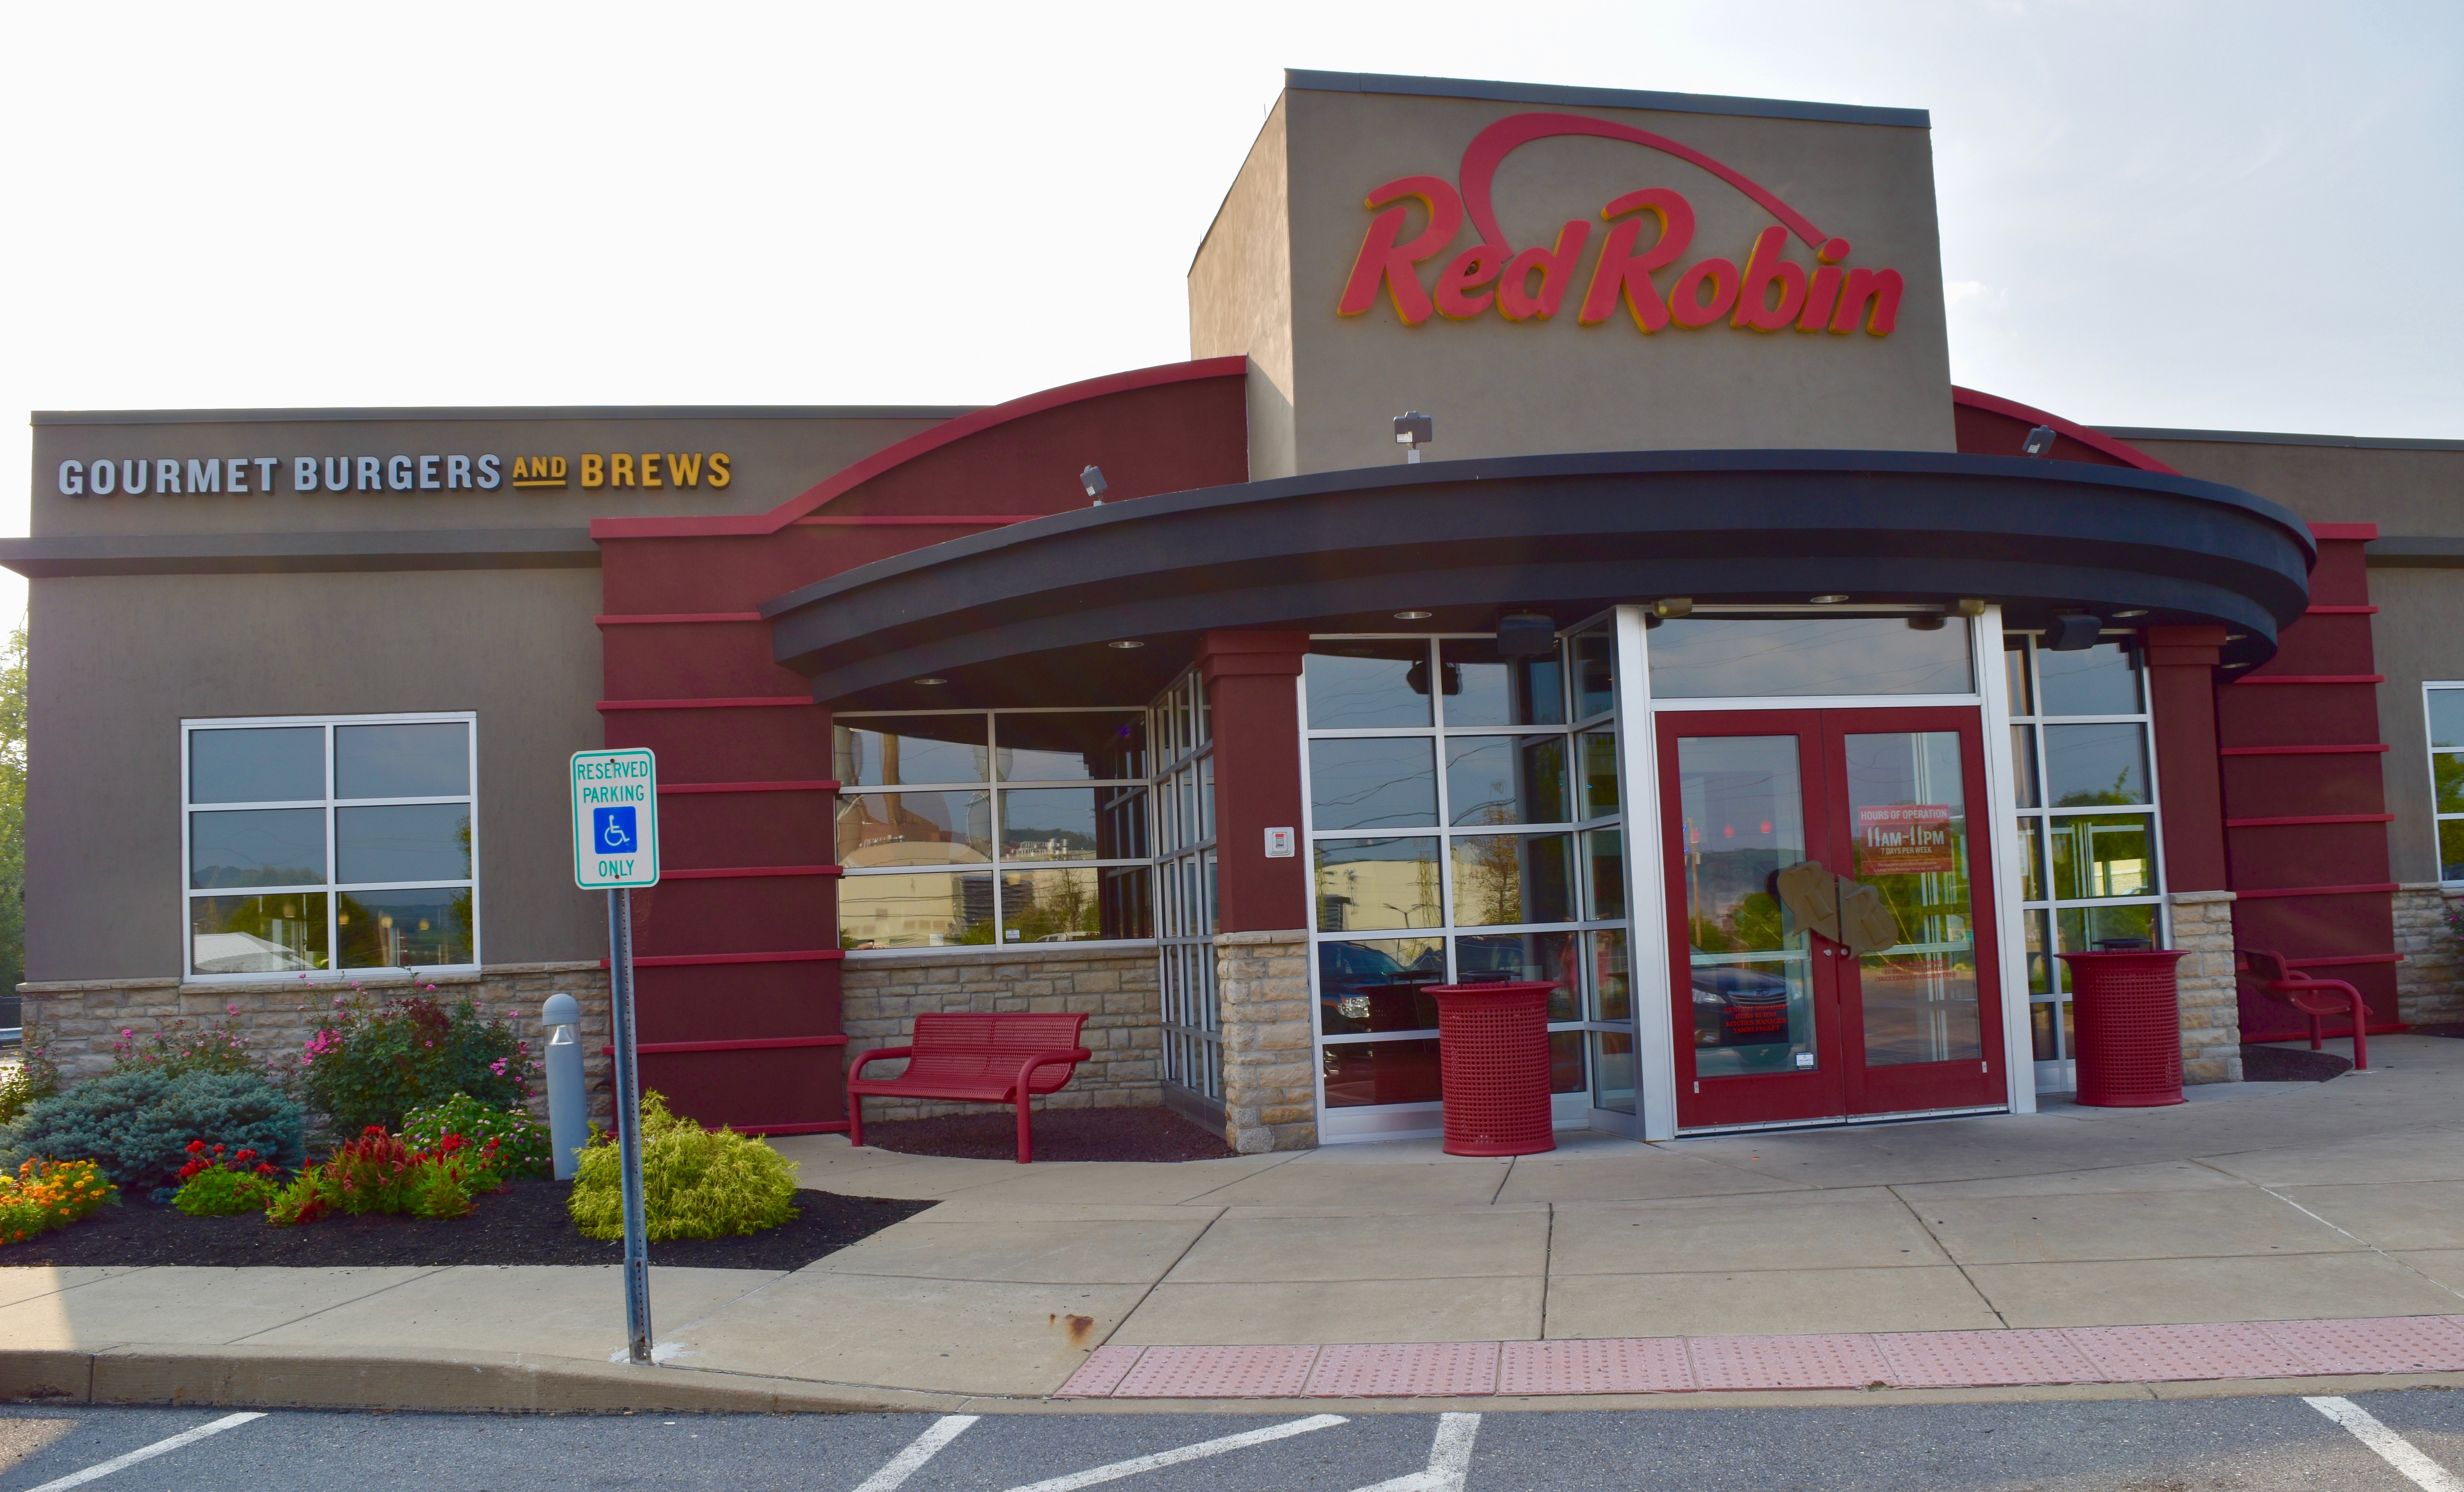 Exterior of the Red Robin Restaurant in Selinsgrove, PA